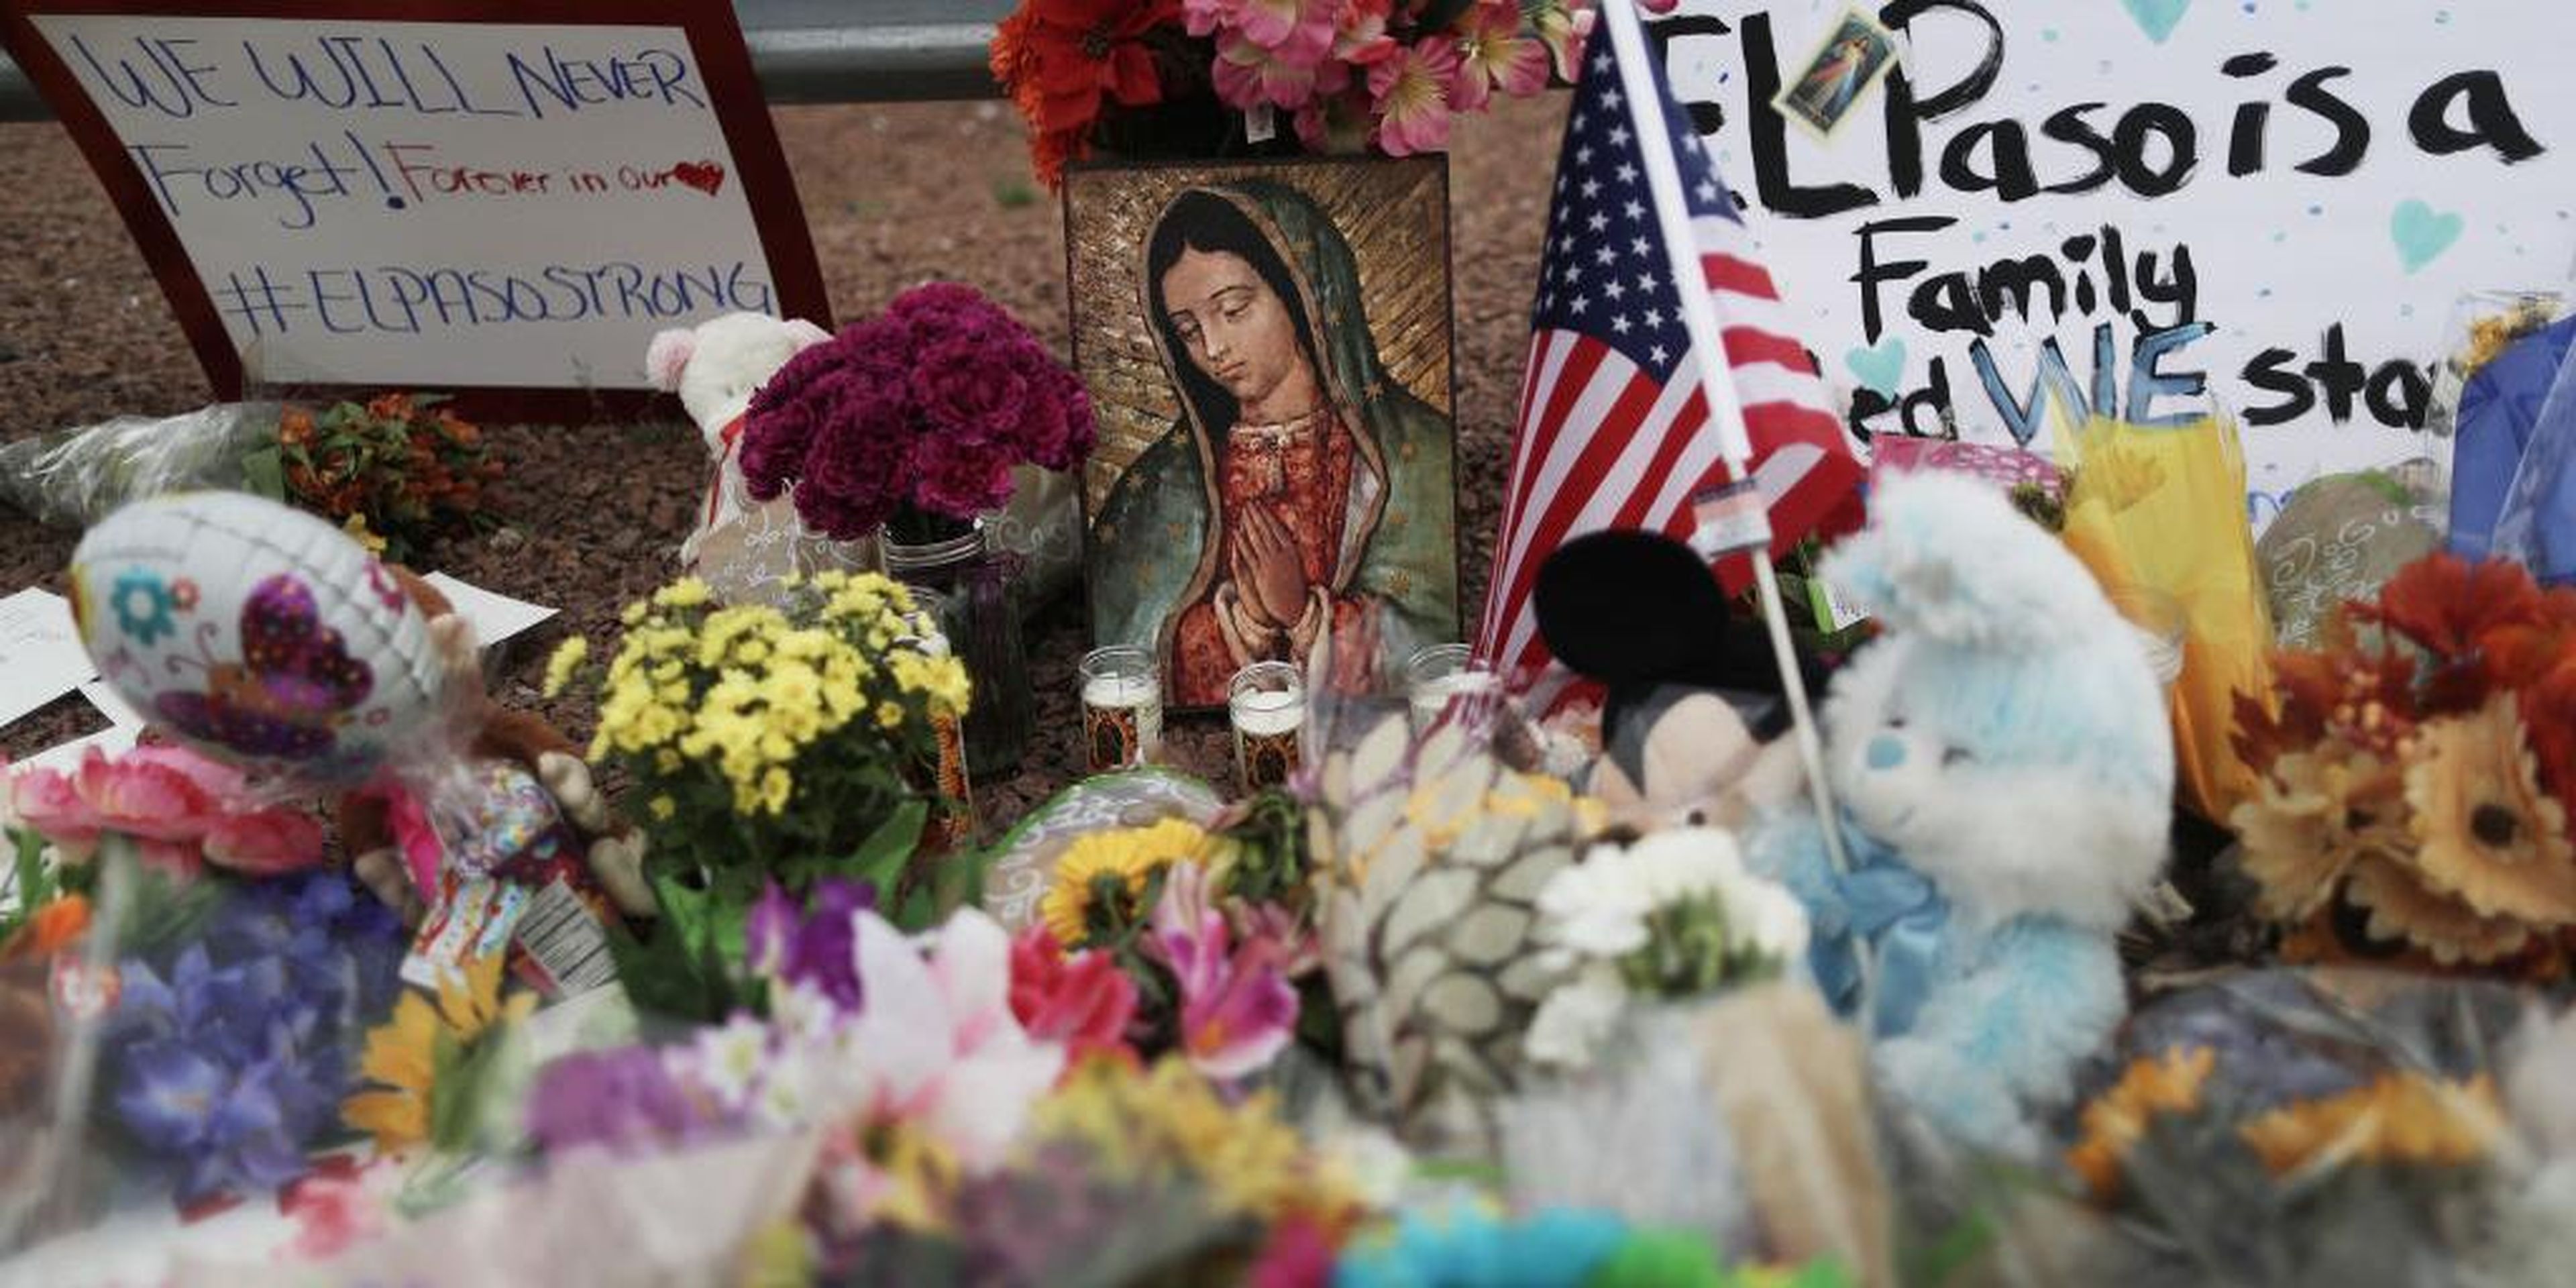 A makeshift memorial outside Walmart, near the scene of a mass shooting that left at least 20 people dead, on August 4, 2019, in El Paso, Texas.